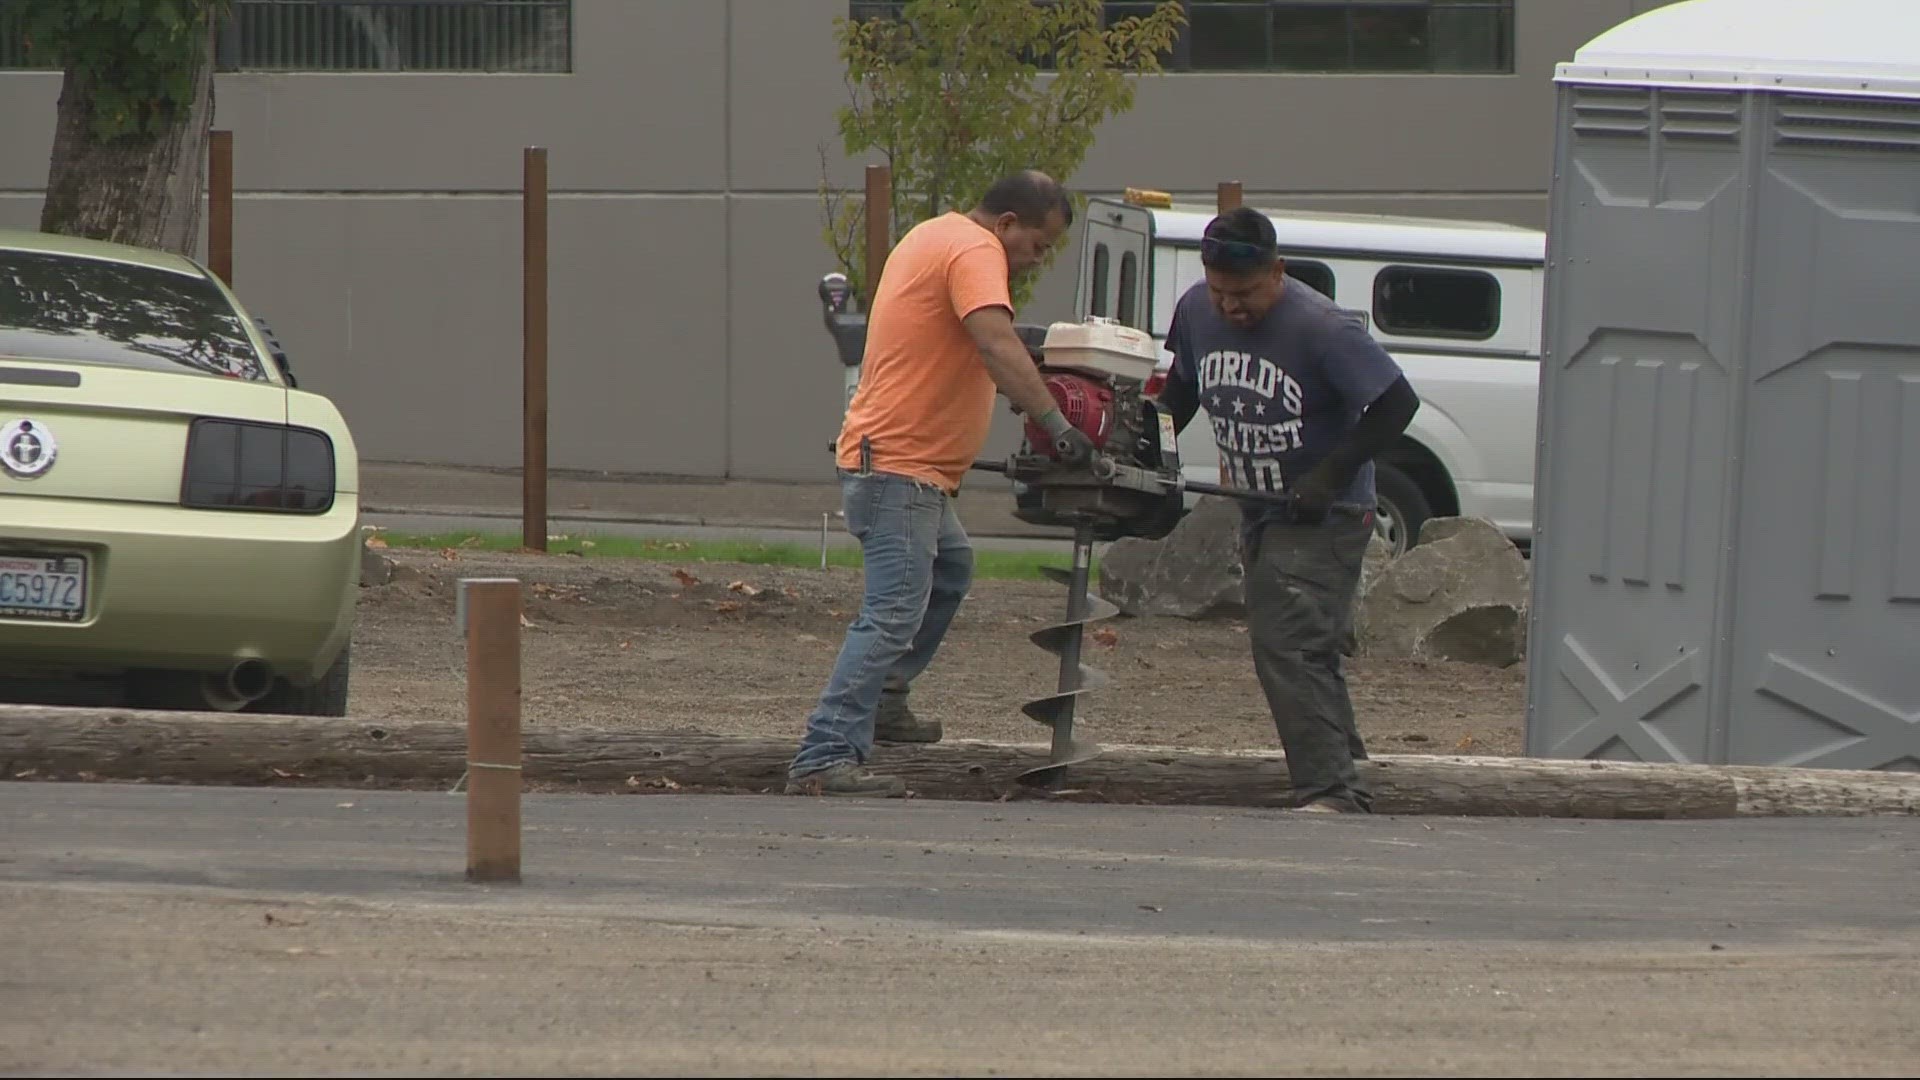 After delays, the downtown location of a new outdoor shelter for homeless people is finally close to an opening. Neighbors are trying to stay hopeful.